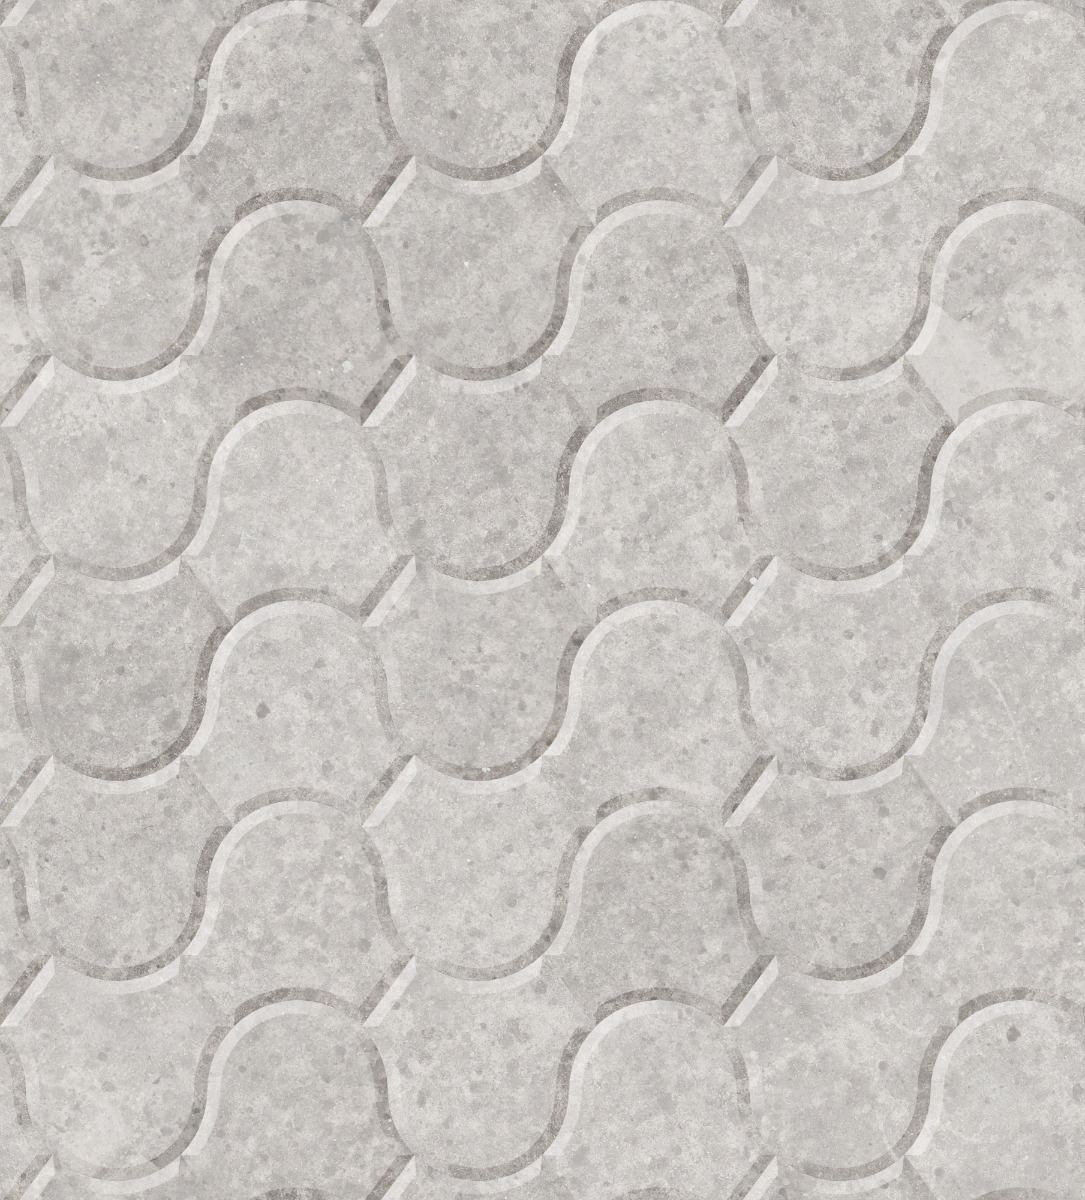 A seamless concrete texture with concrete blocks arranged in a Interlocking Wave pattern